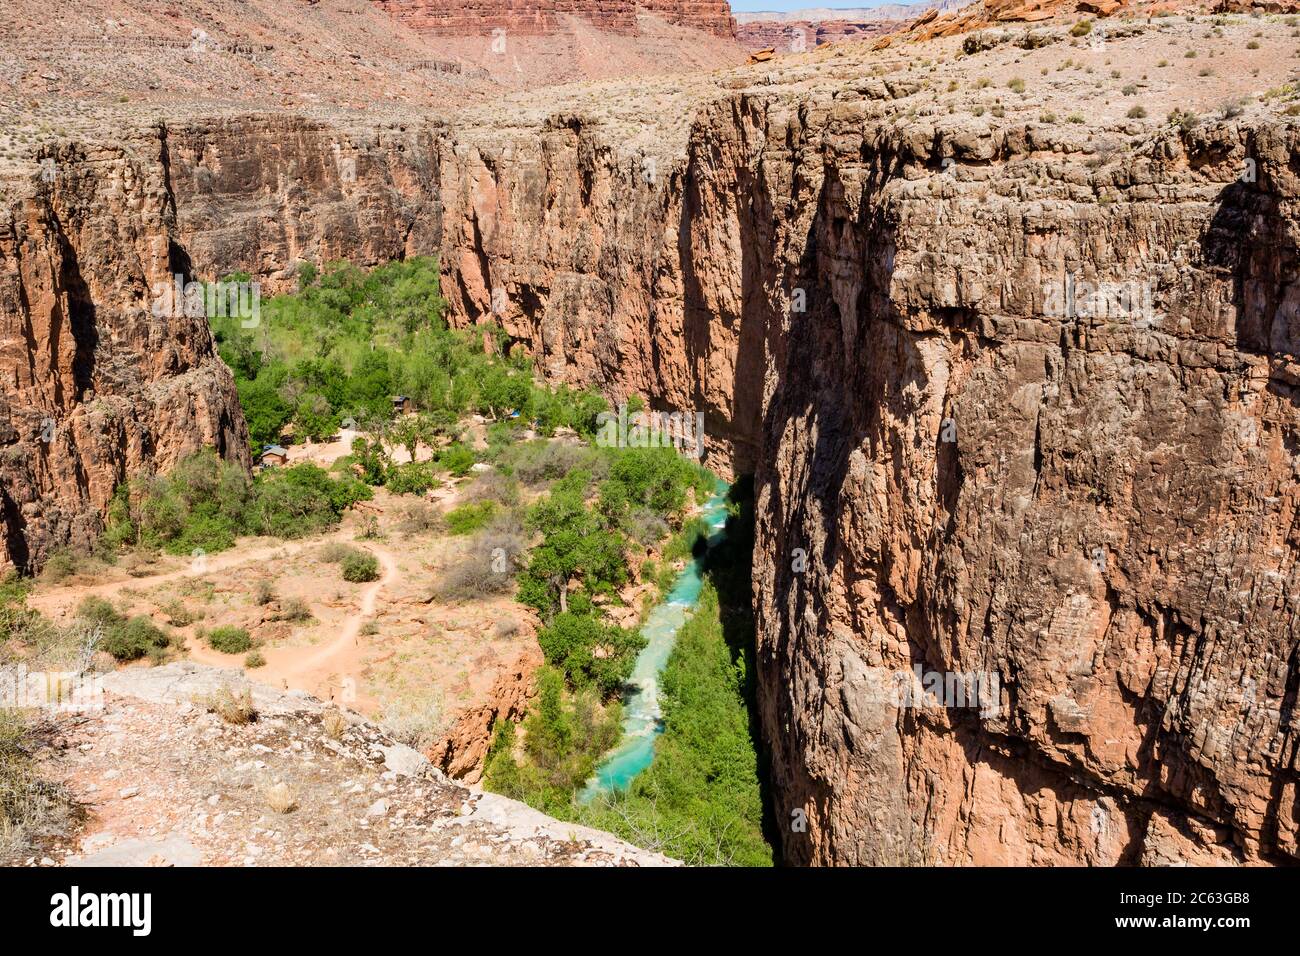 Havasu Creek flows through camping area which starts in the trees where the creek disappears from view. Campground owned by Havasupai Indian Tribe, AZ. Stock Photo